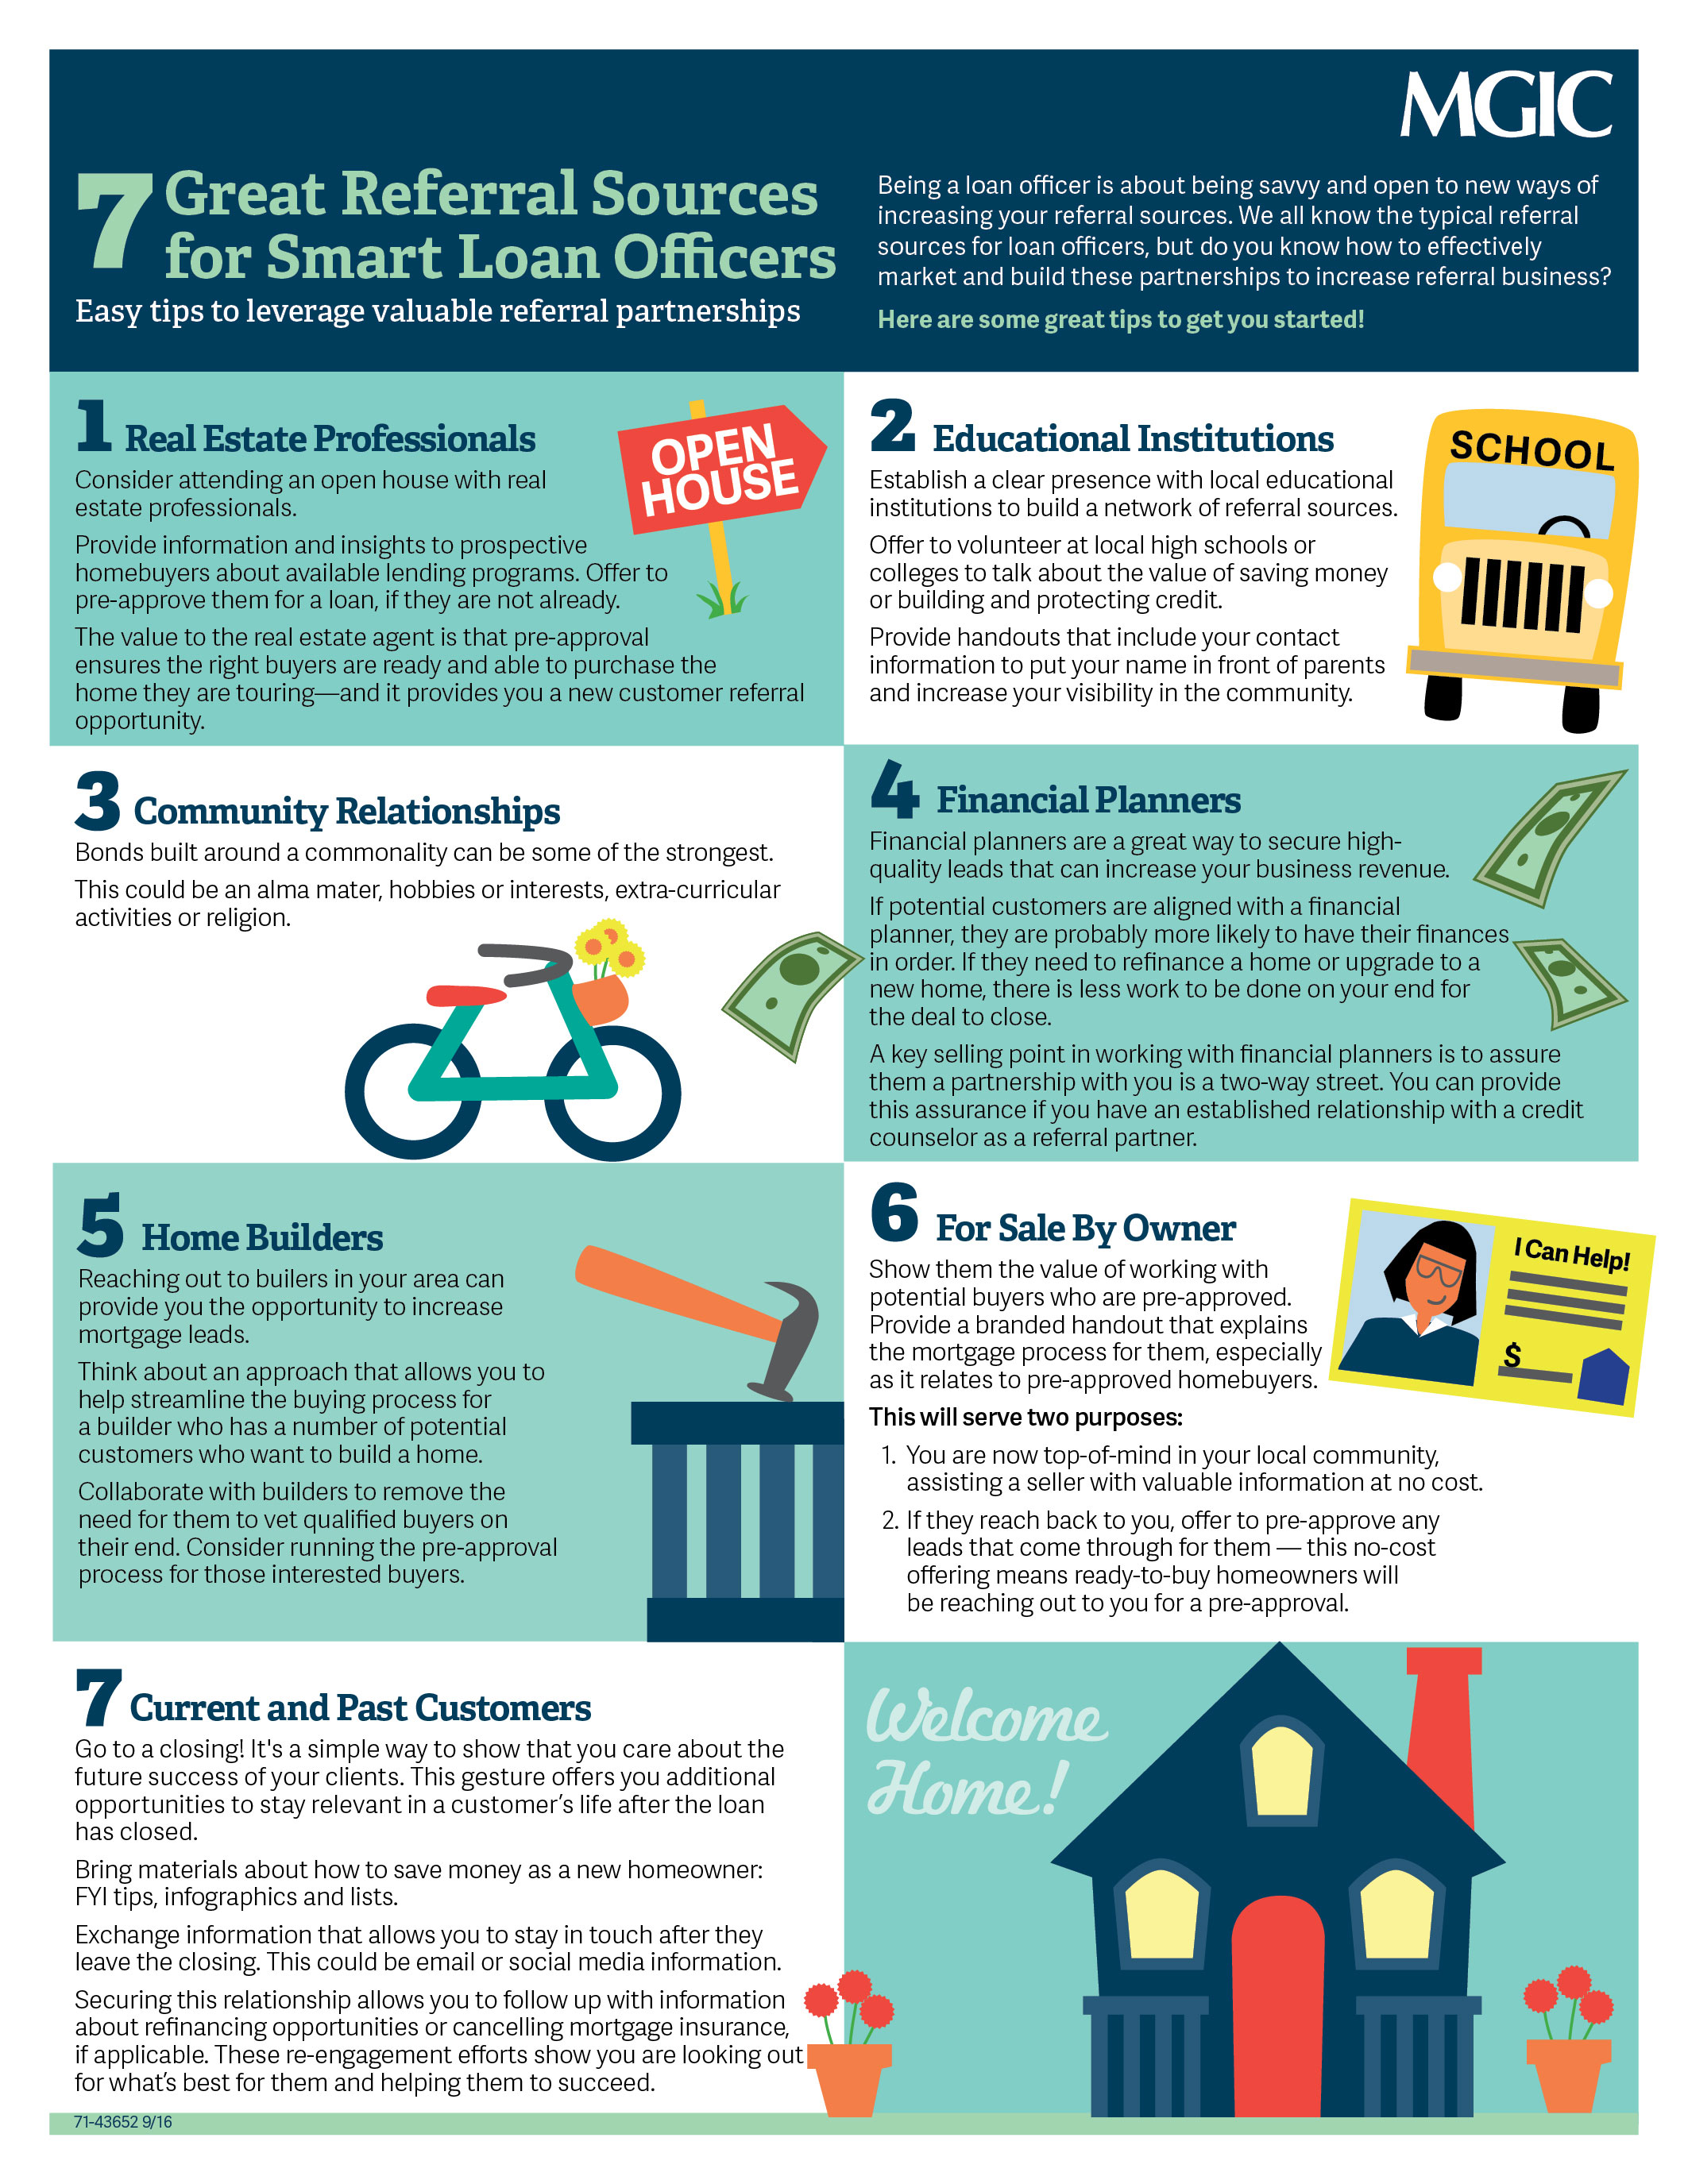 Infographic with tips for loan officers about referral sources